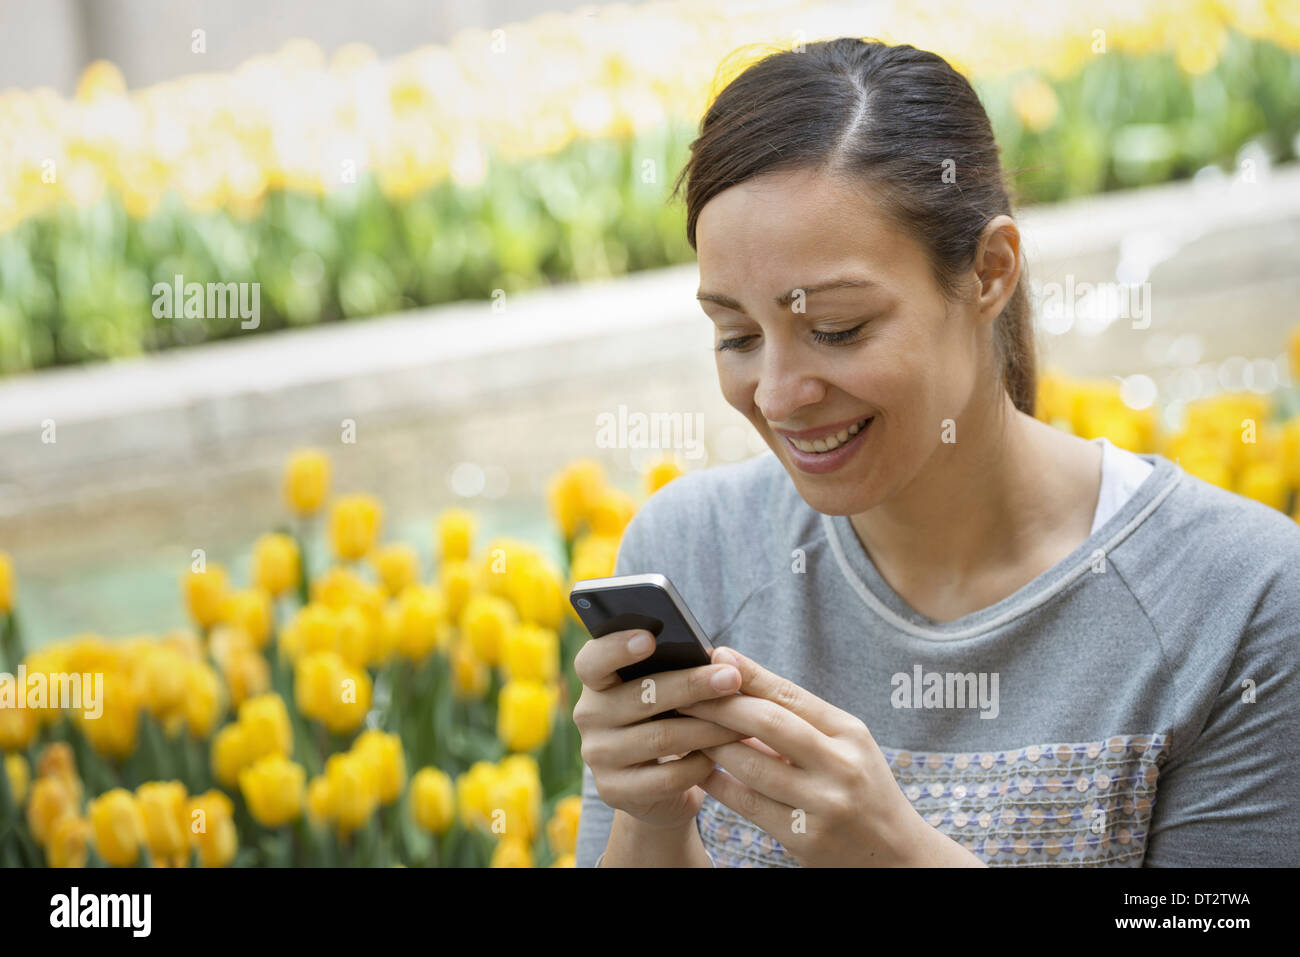 Urban Lifestyle A woman in the park by a bed of yellow tulips using her mobile phone Stock Photo